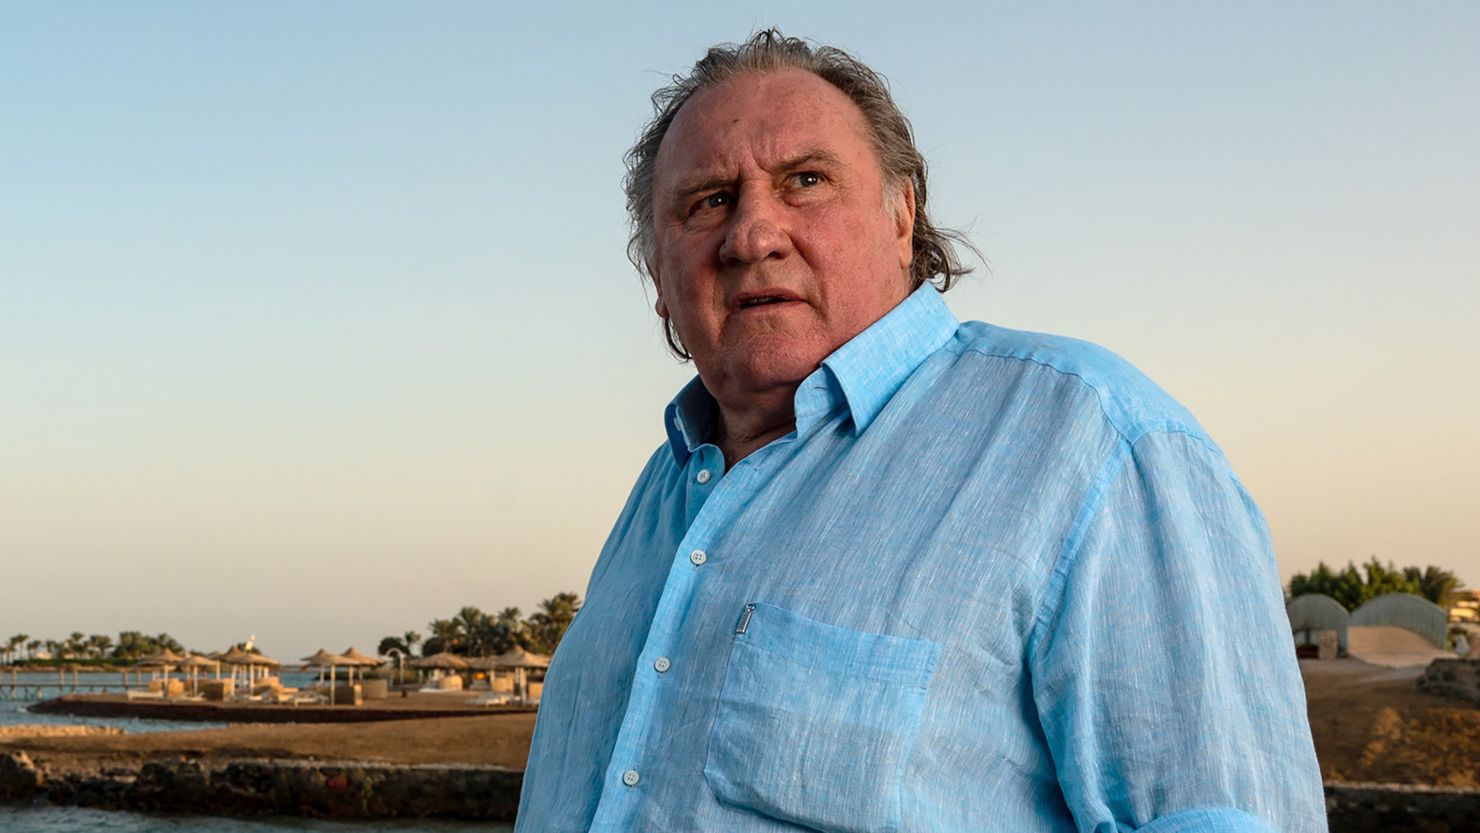 French actor Gerard Depardieu at the Egyptian Red Sea resort of El Gouna on October 24, 2020, a day after receiving the Career Achievement Award at El Gouna Film Festival.